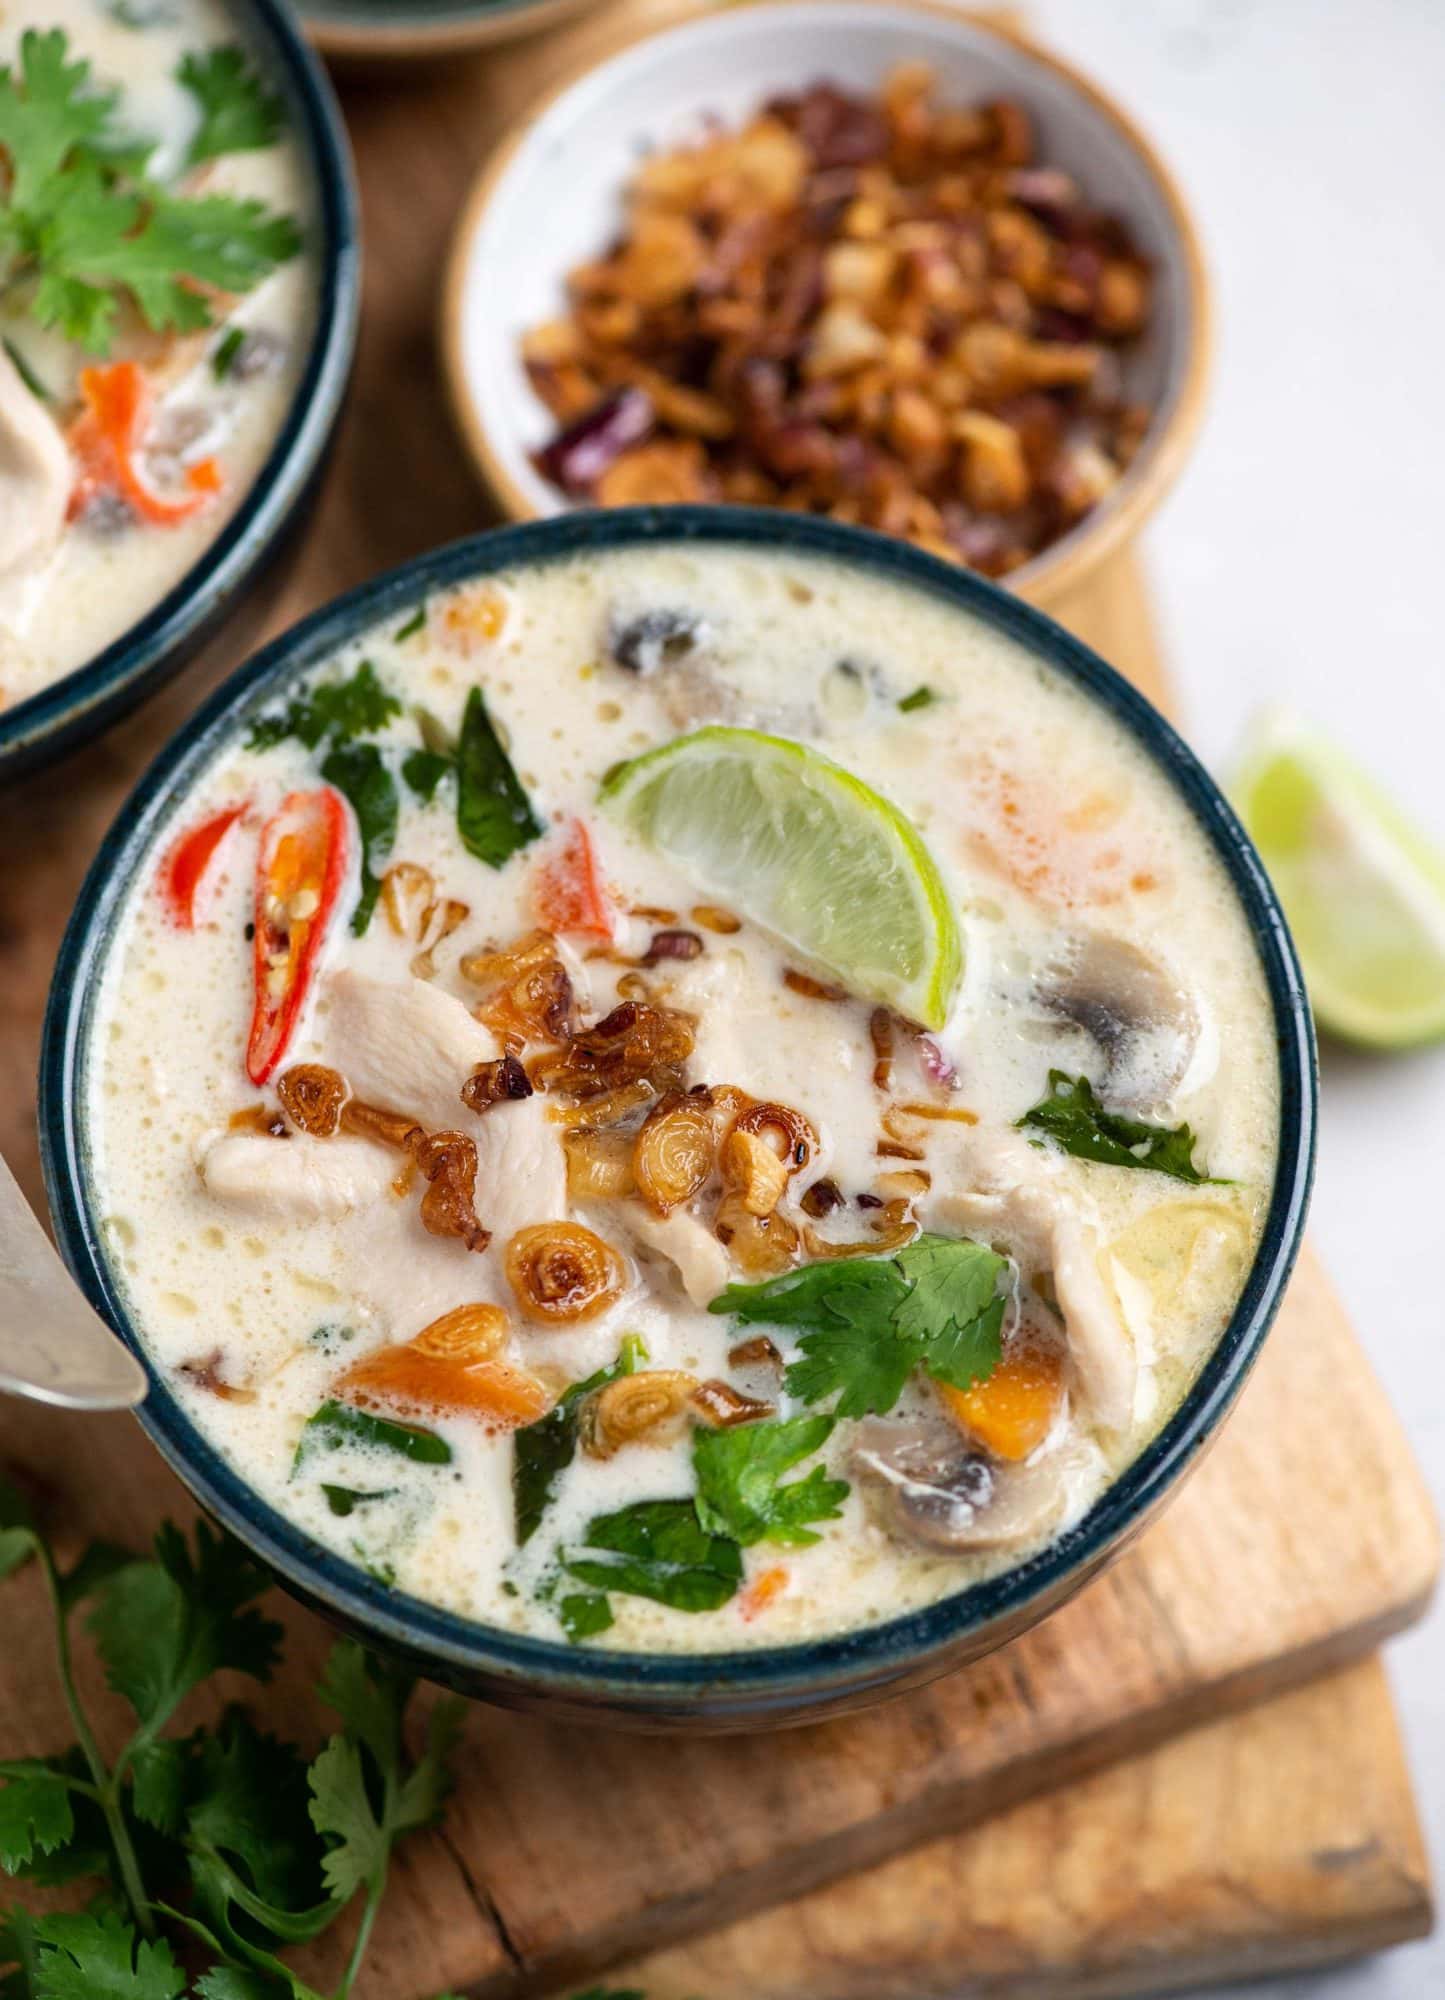 Thai coconut chicken soup or Tom kha gai/kai plated in a blue bowl with chicken, mushrooms, coriander, bird-eye chili shown on top and garnished with fried garlic and lime slice.